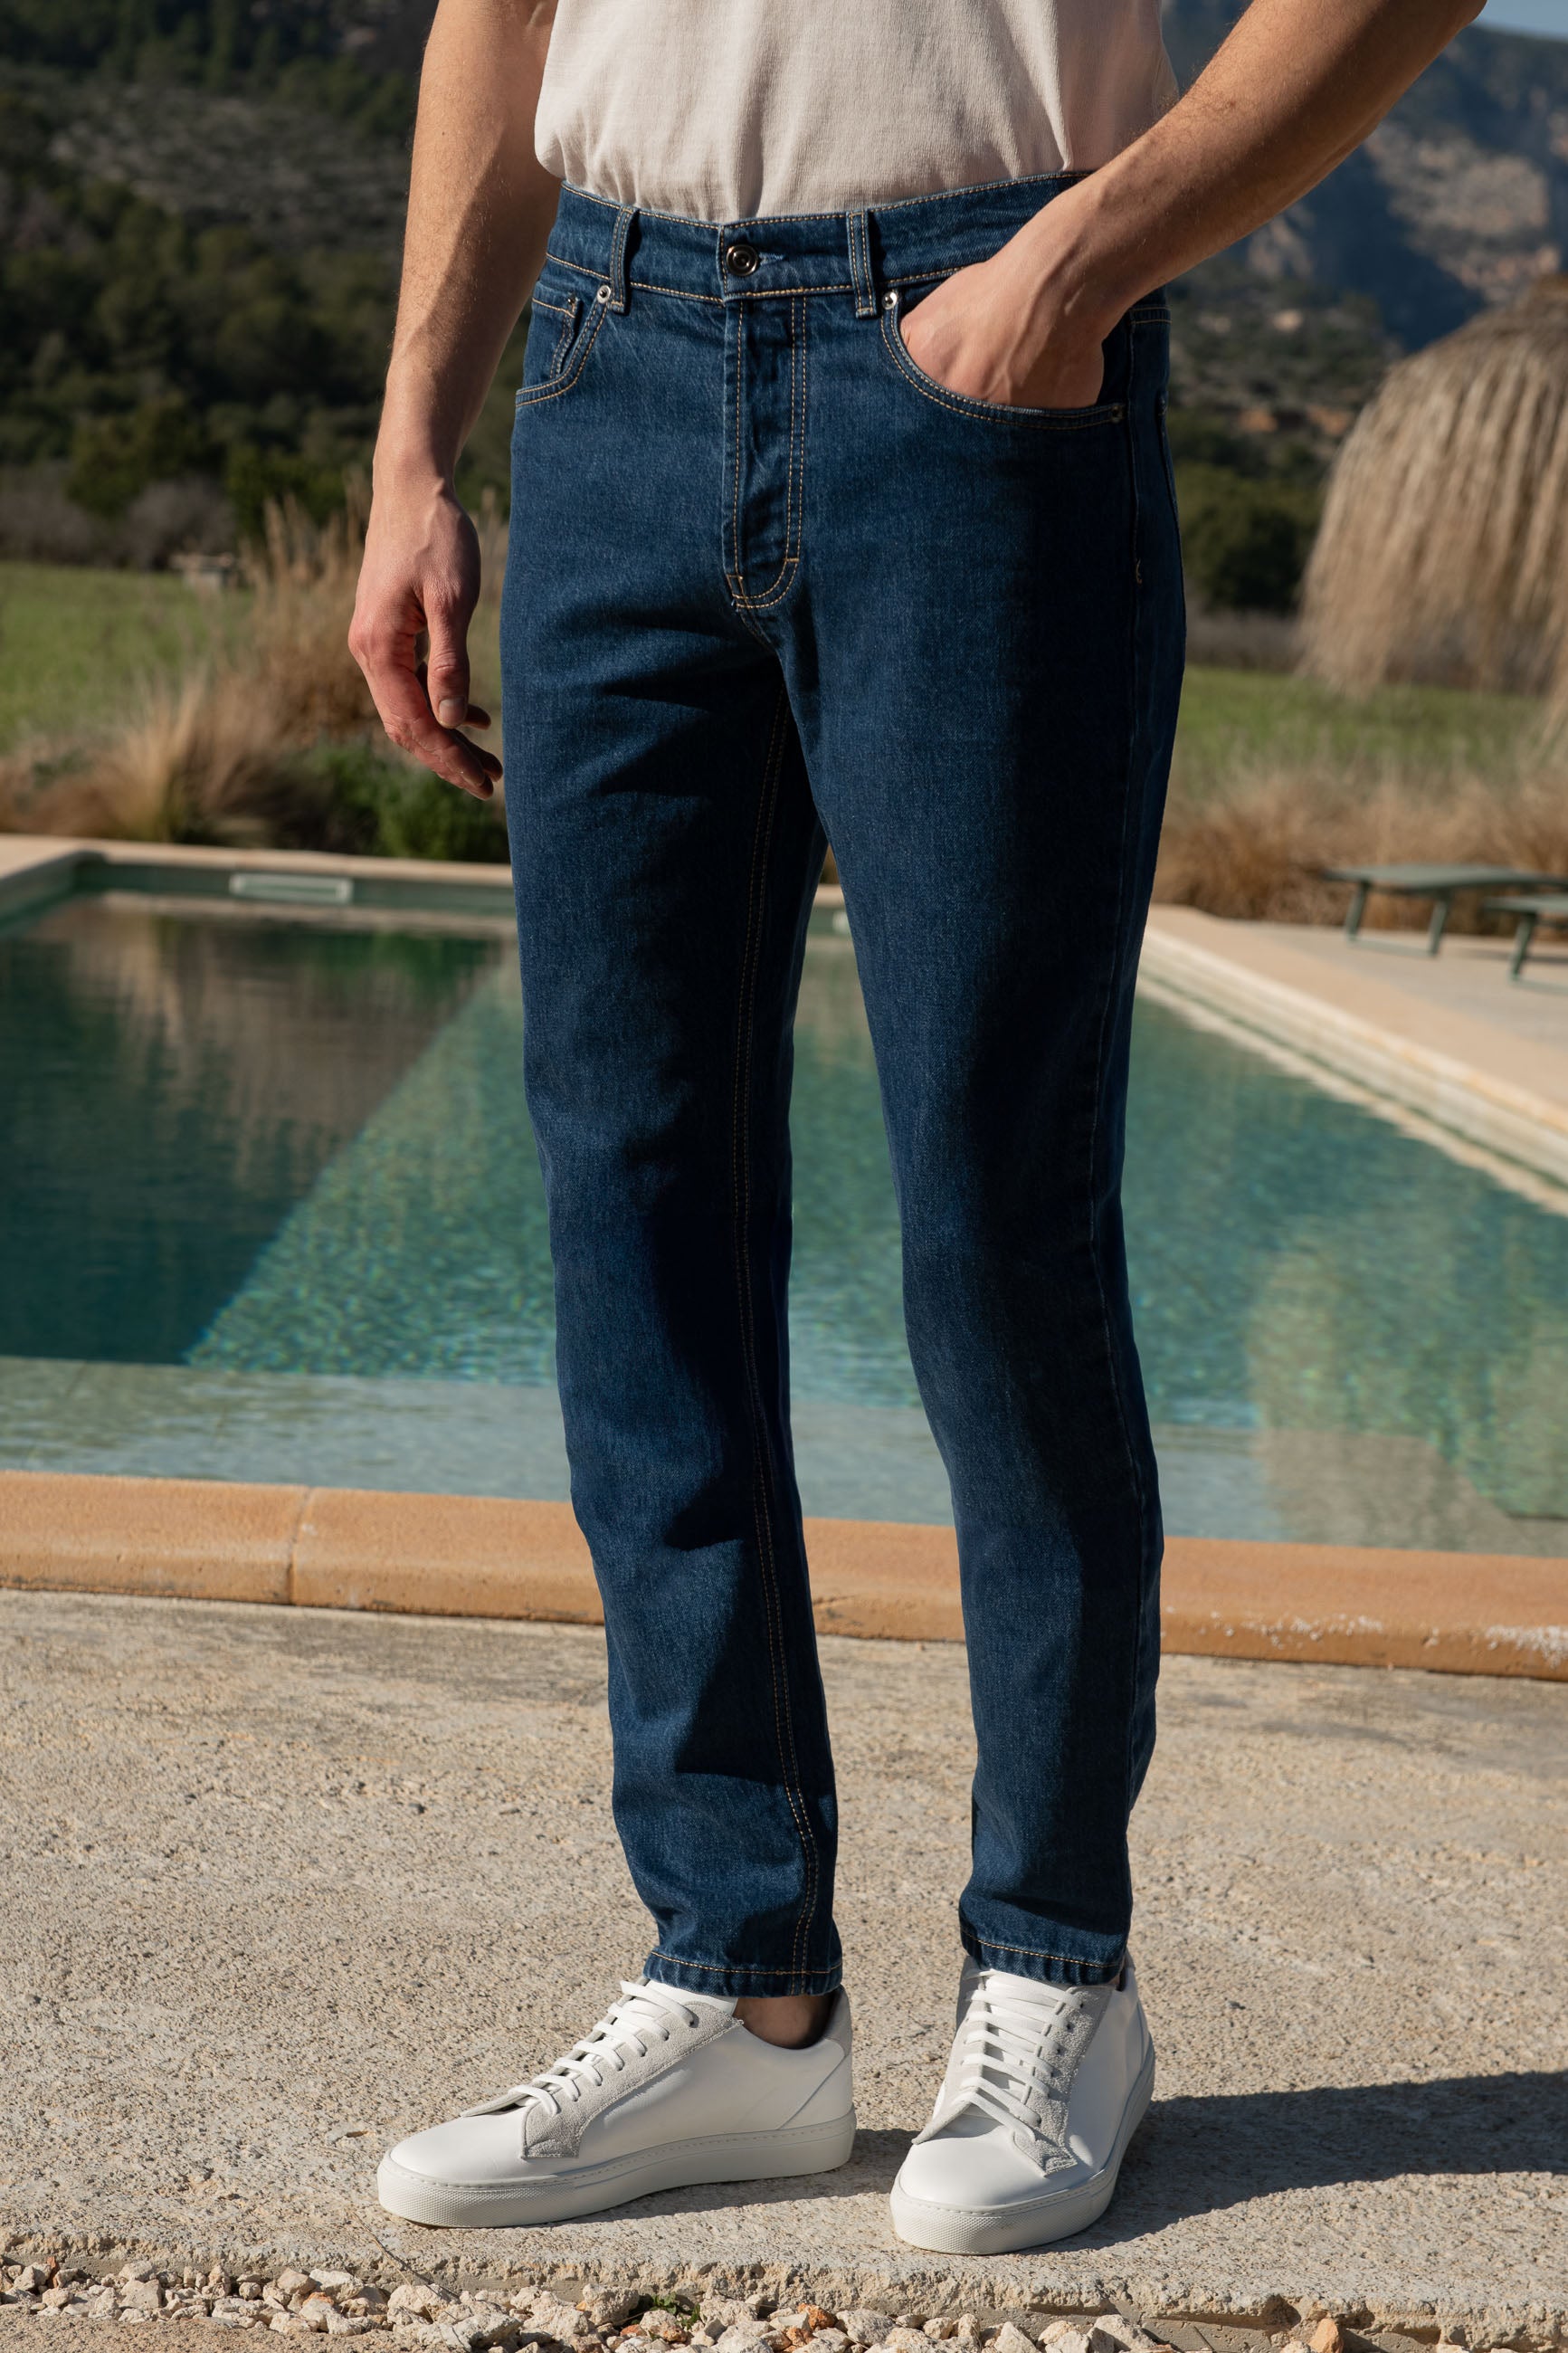 Mid-blue jeans - Candiani cotton - Made in Italy